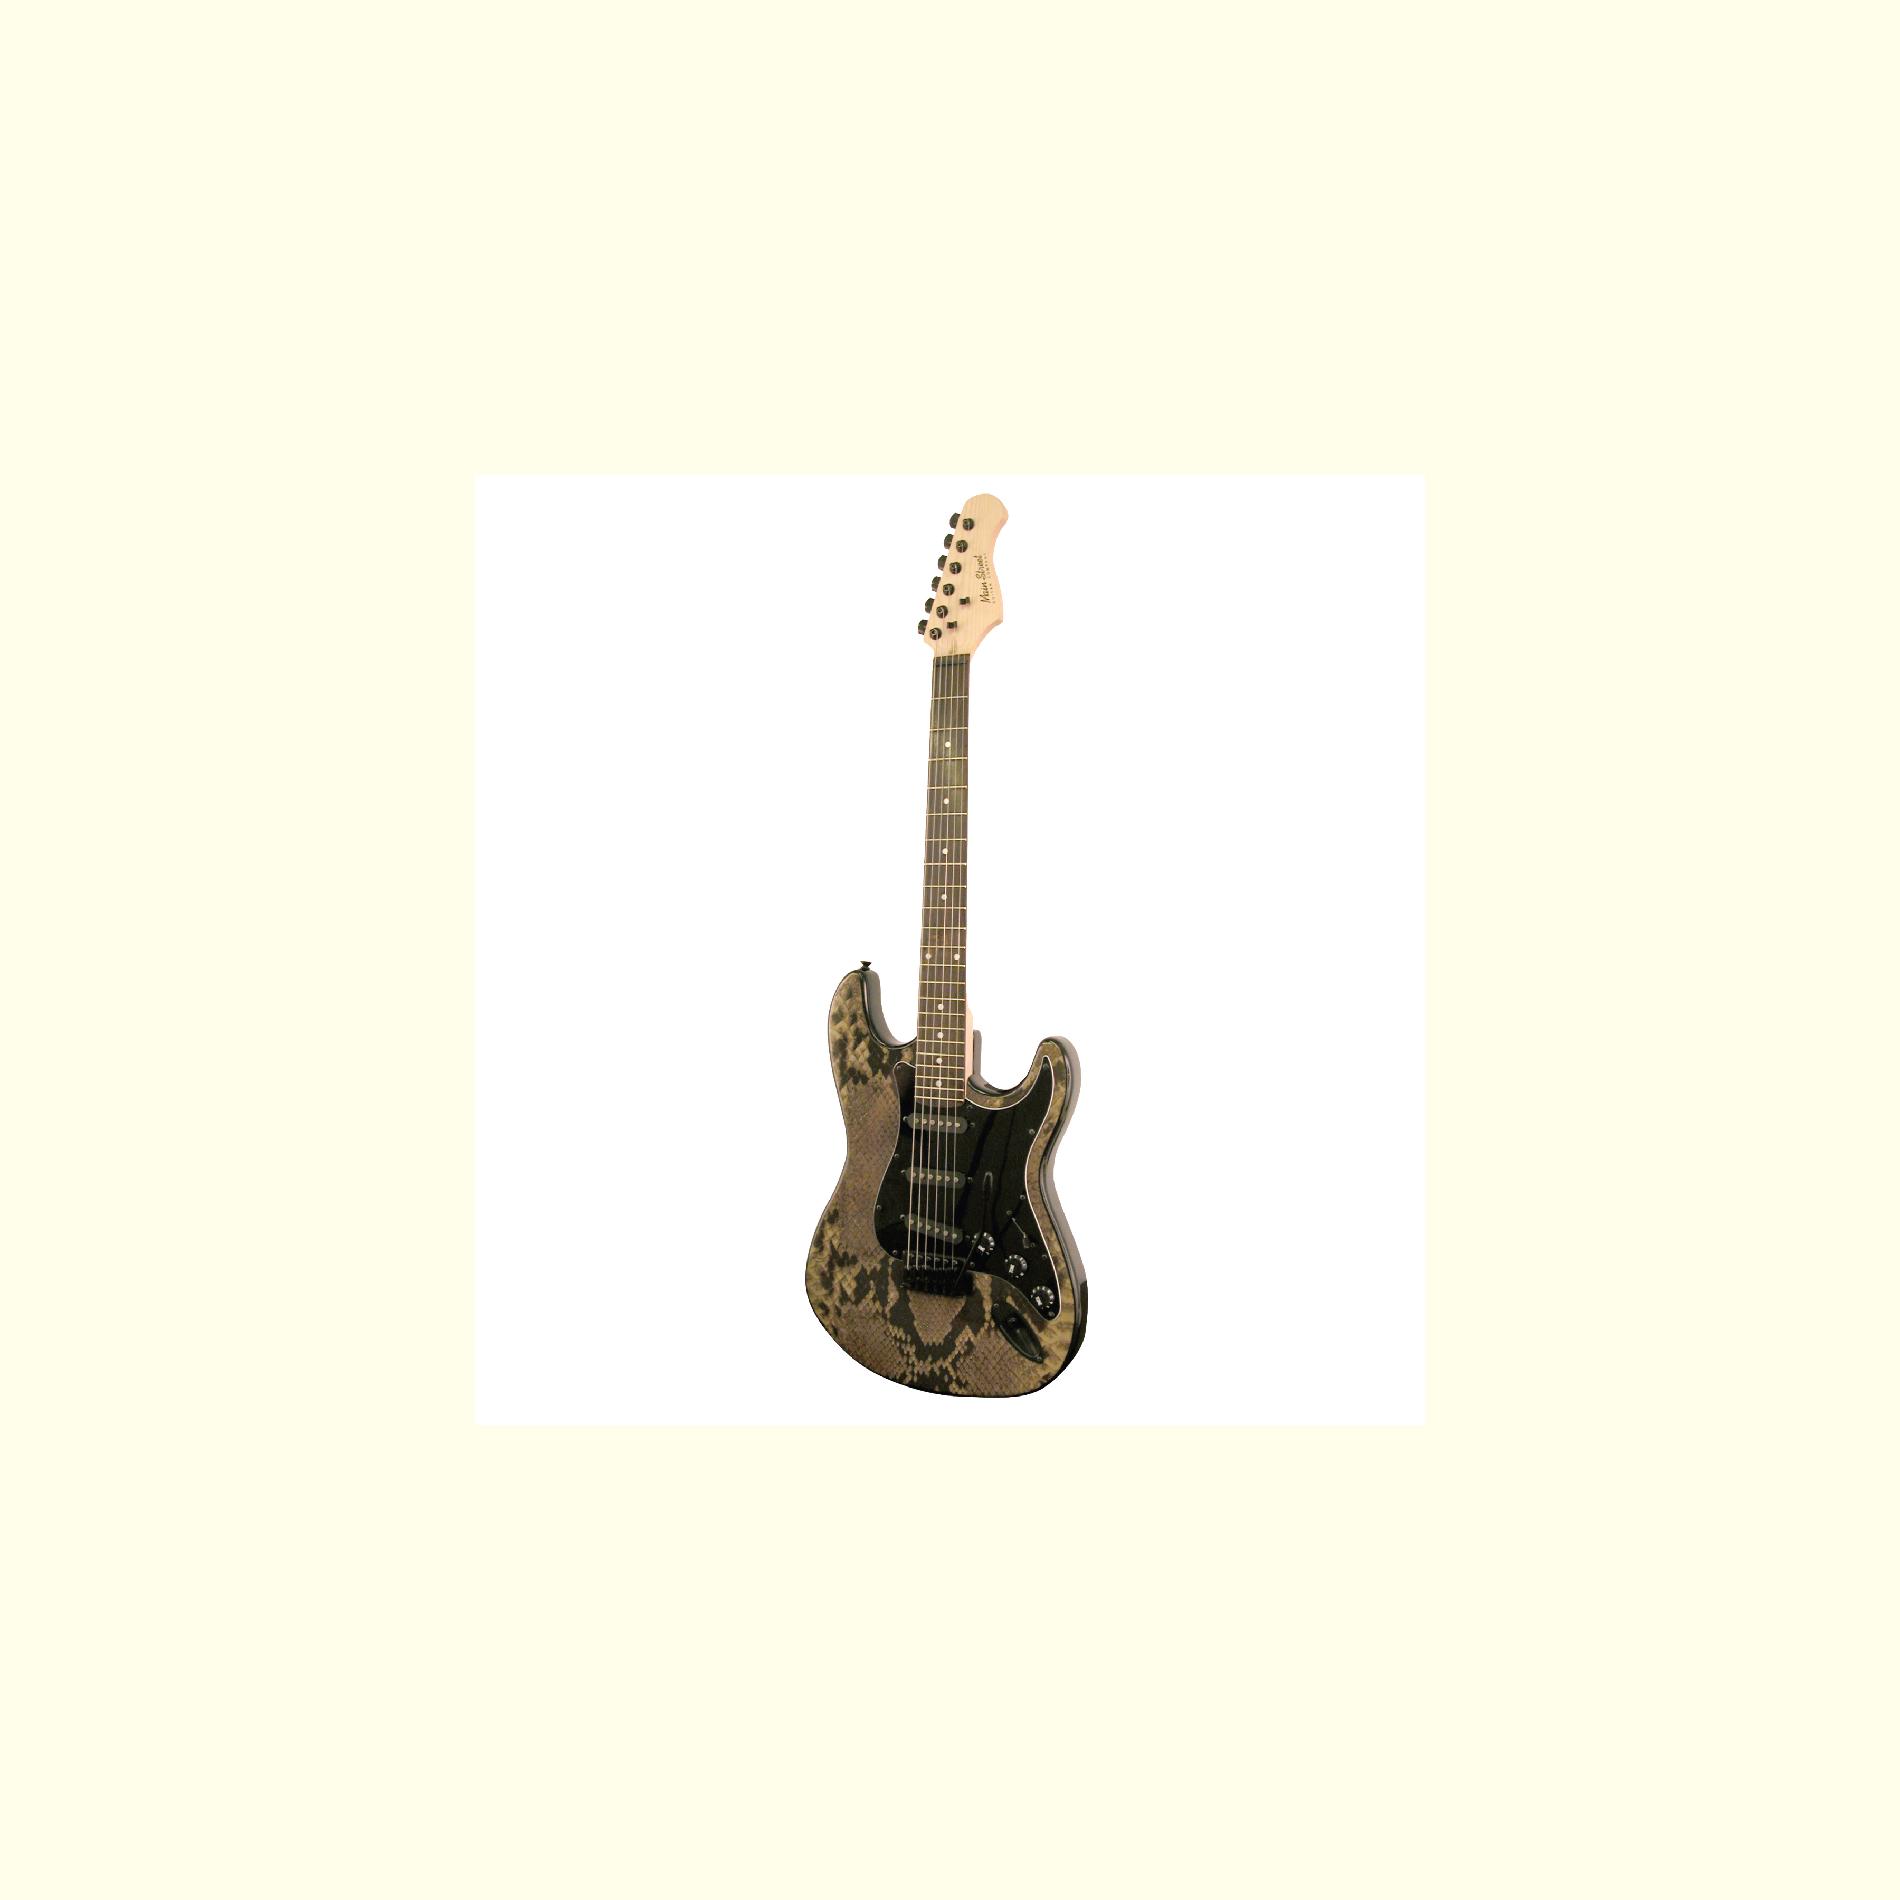 Main Street Double Cut-away Electric Guitar With Snake Skin Body